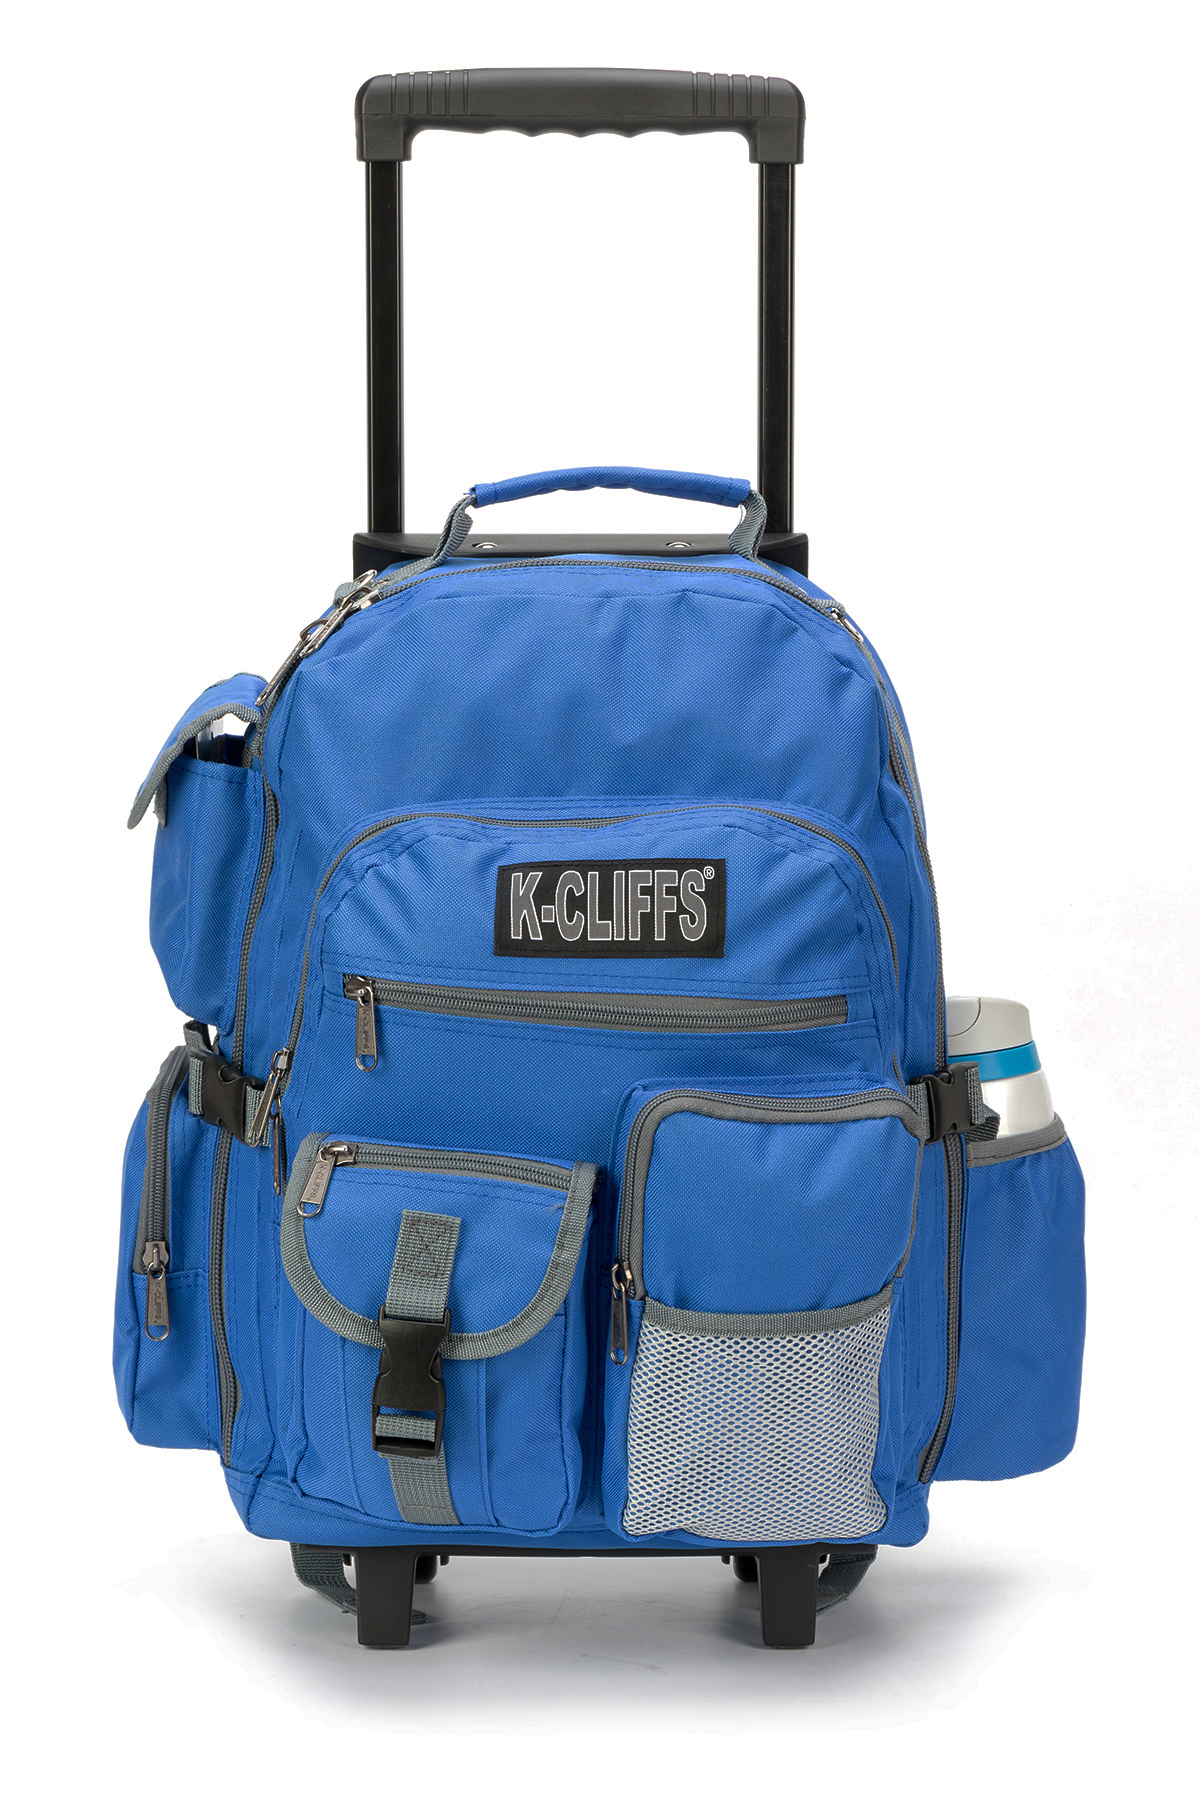 K-Cliffs Rolling Heavy Duty School Backpack with Wheels  Daypack multiple Pockets Royal - image 1 of 10